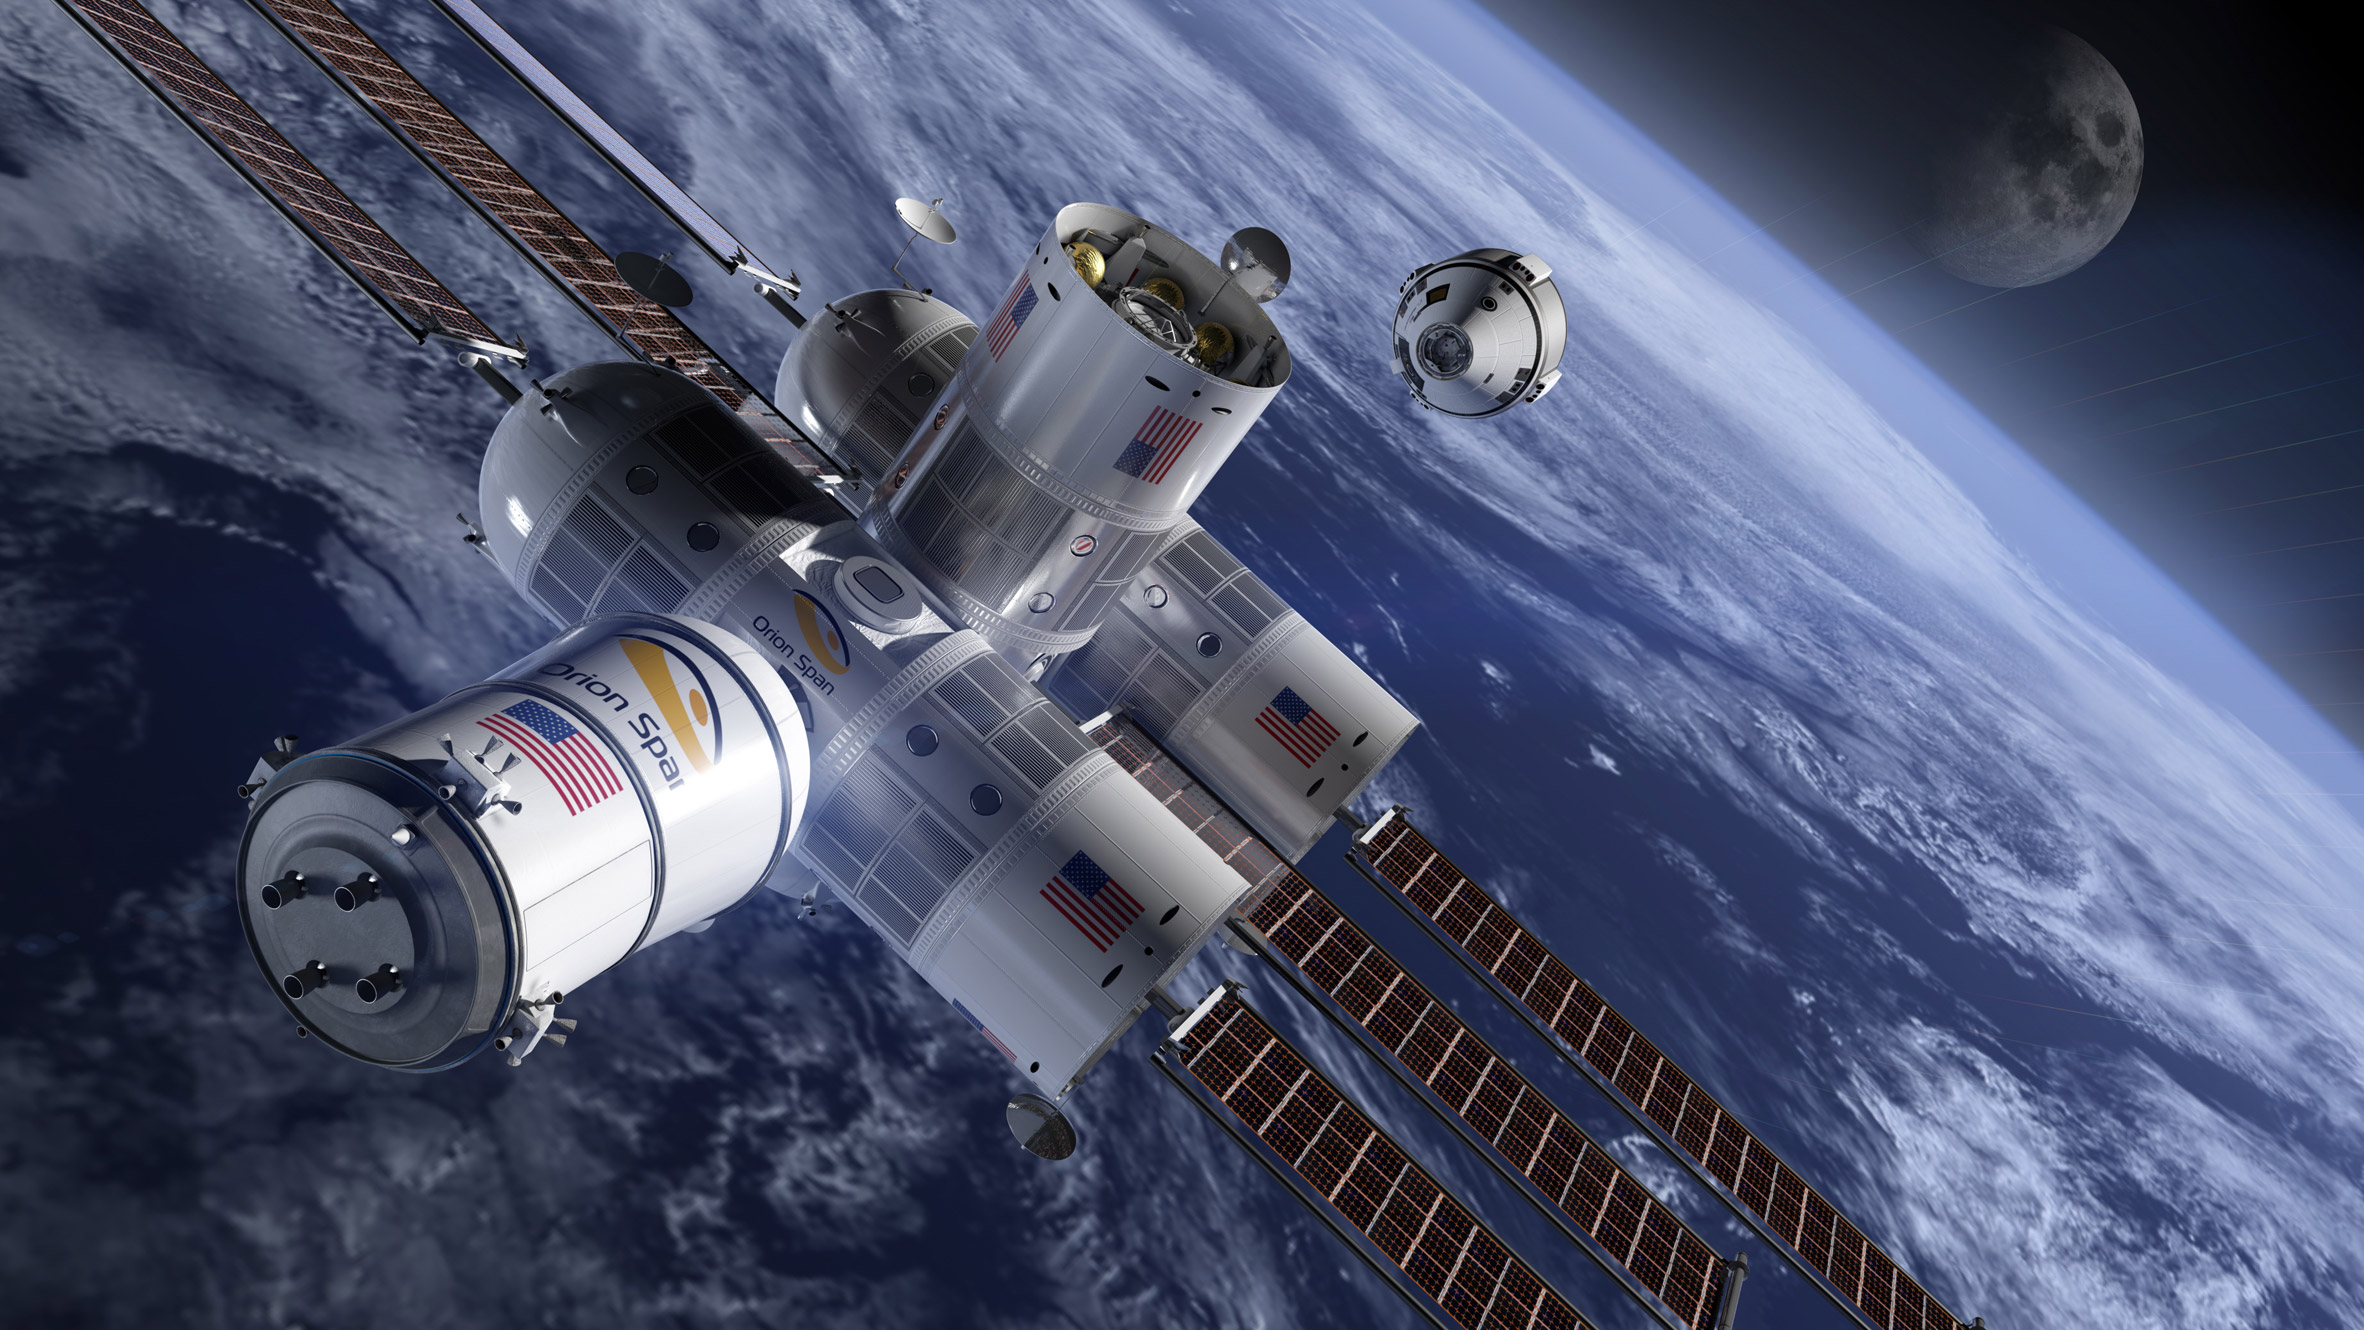 Orion Span plans first space hotel